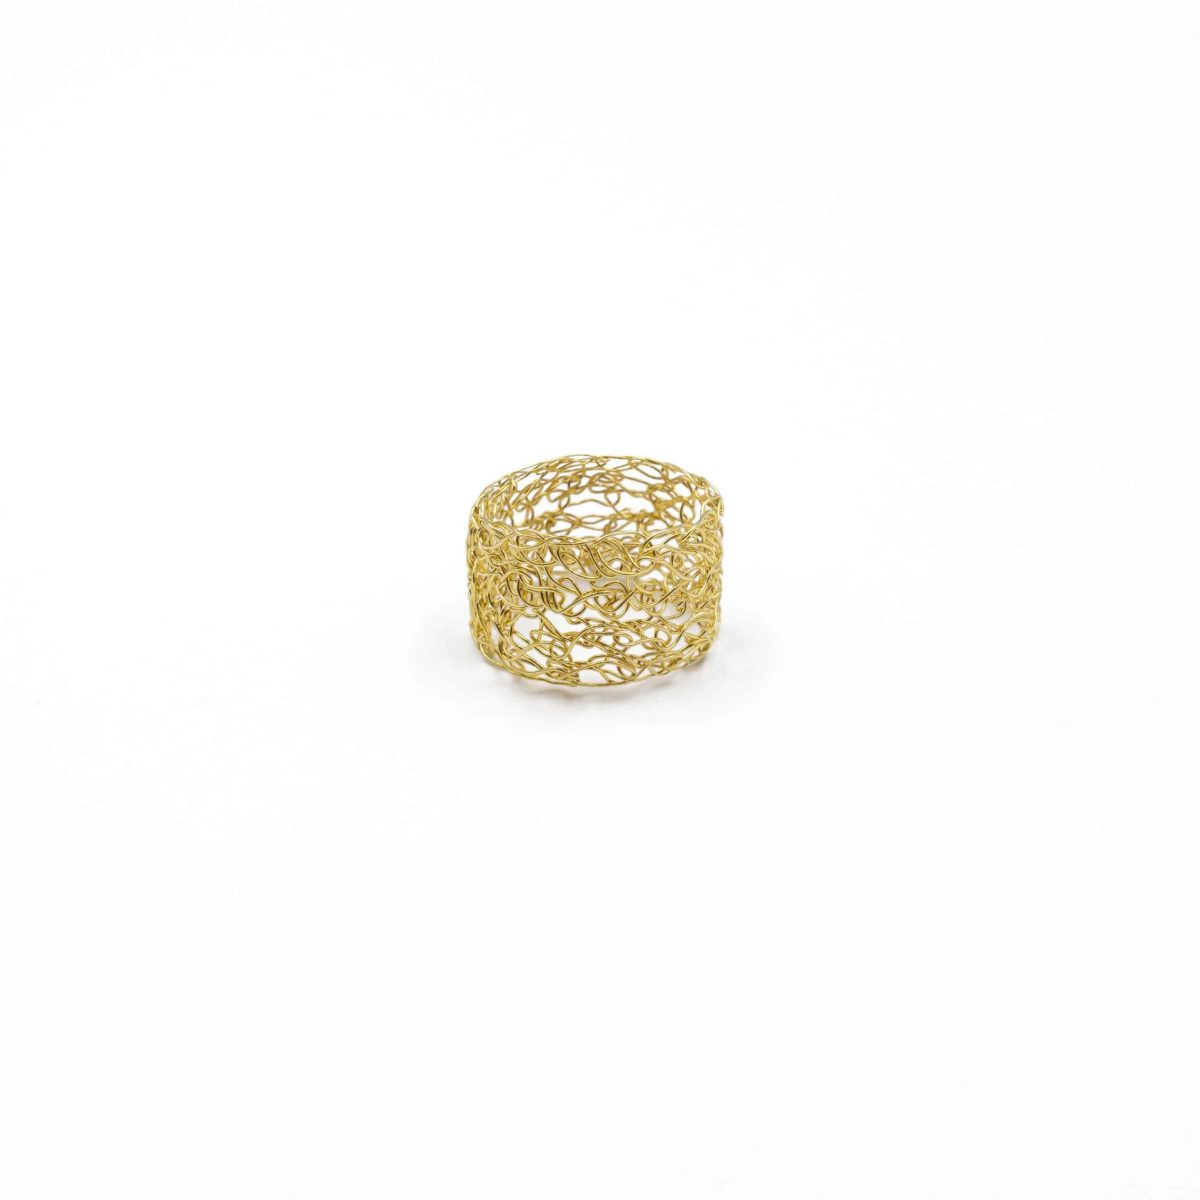 front view of adjustable 18ct yellow gold band ring